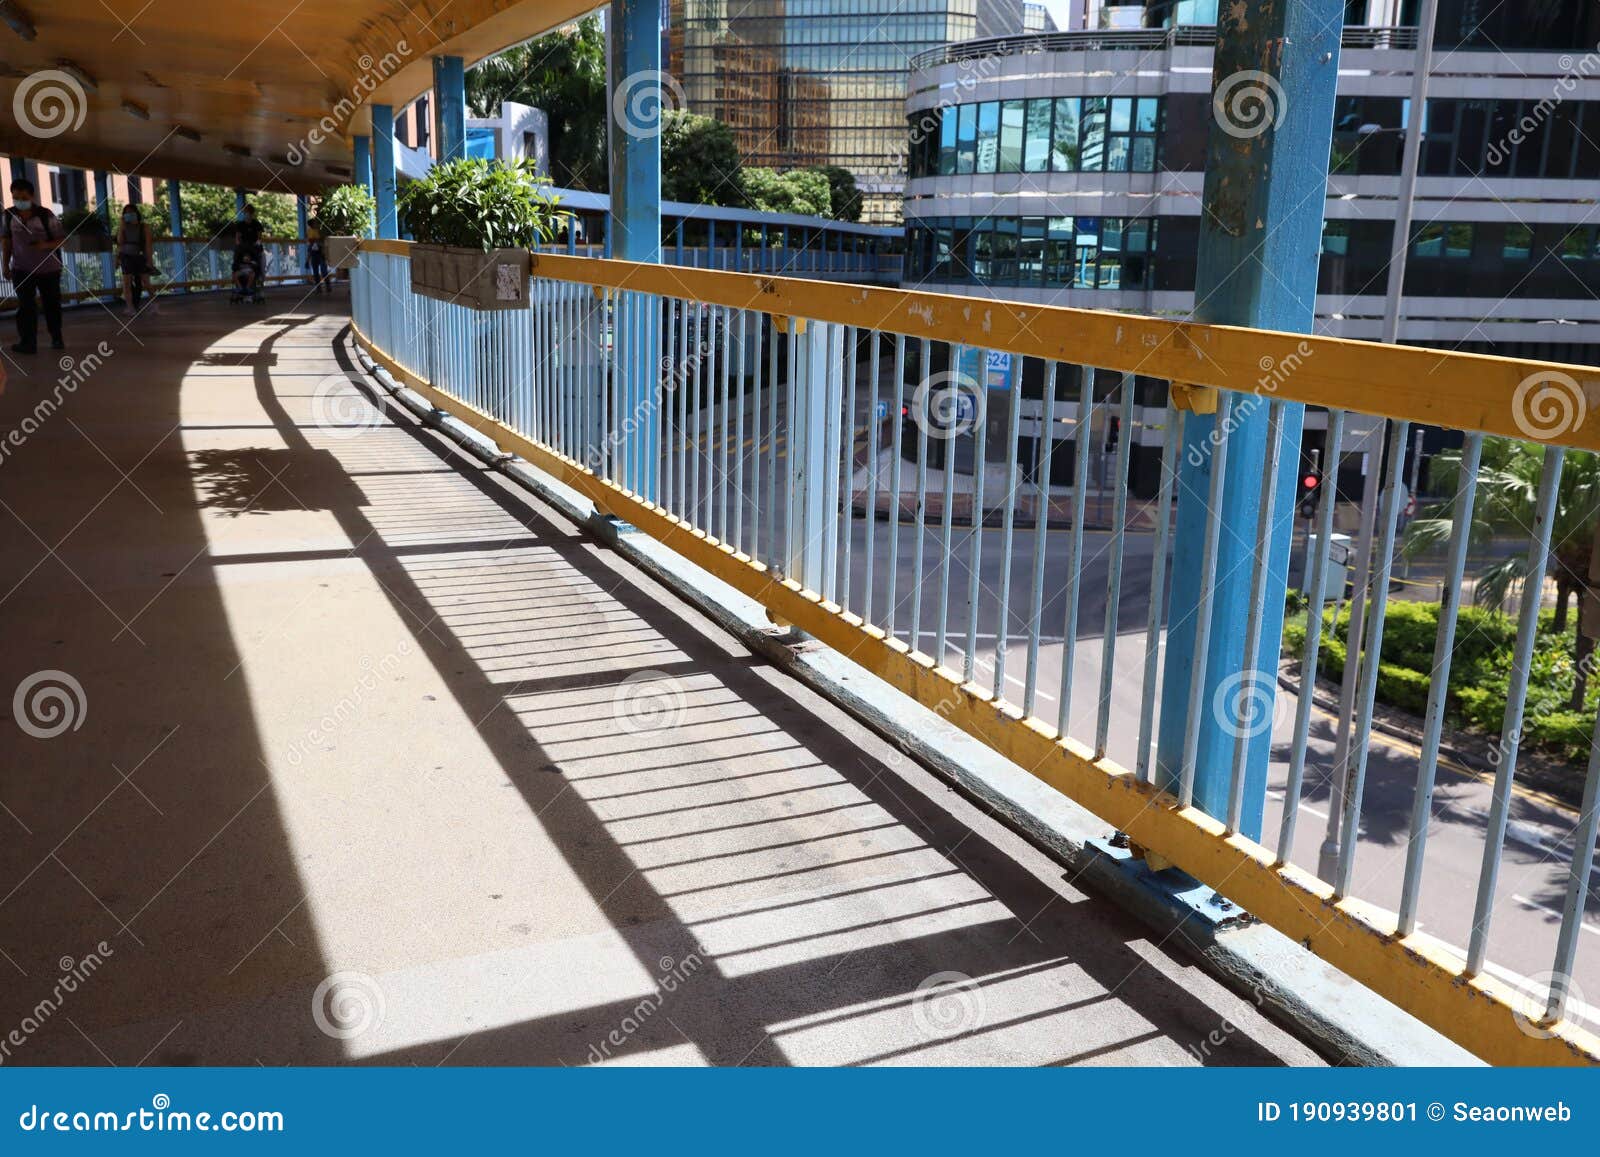 18 July 2020 Angle View of Shadow on Footbridge at Hung Hom Stock Image ...